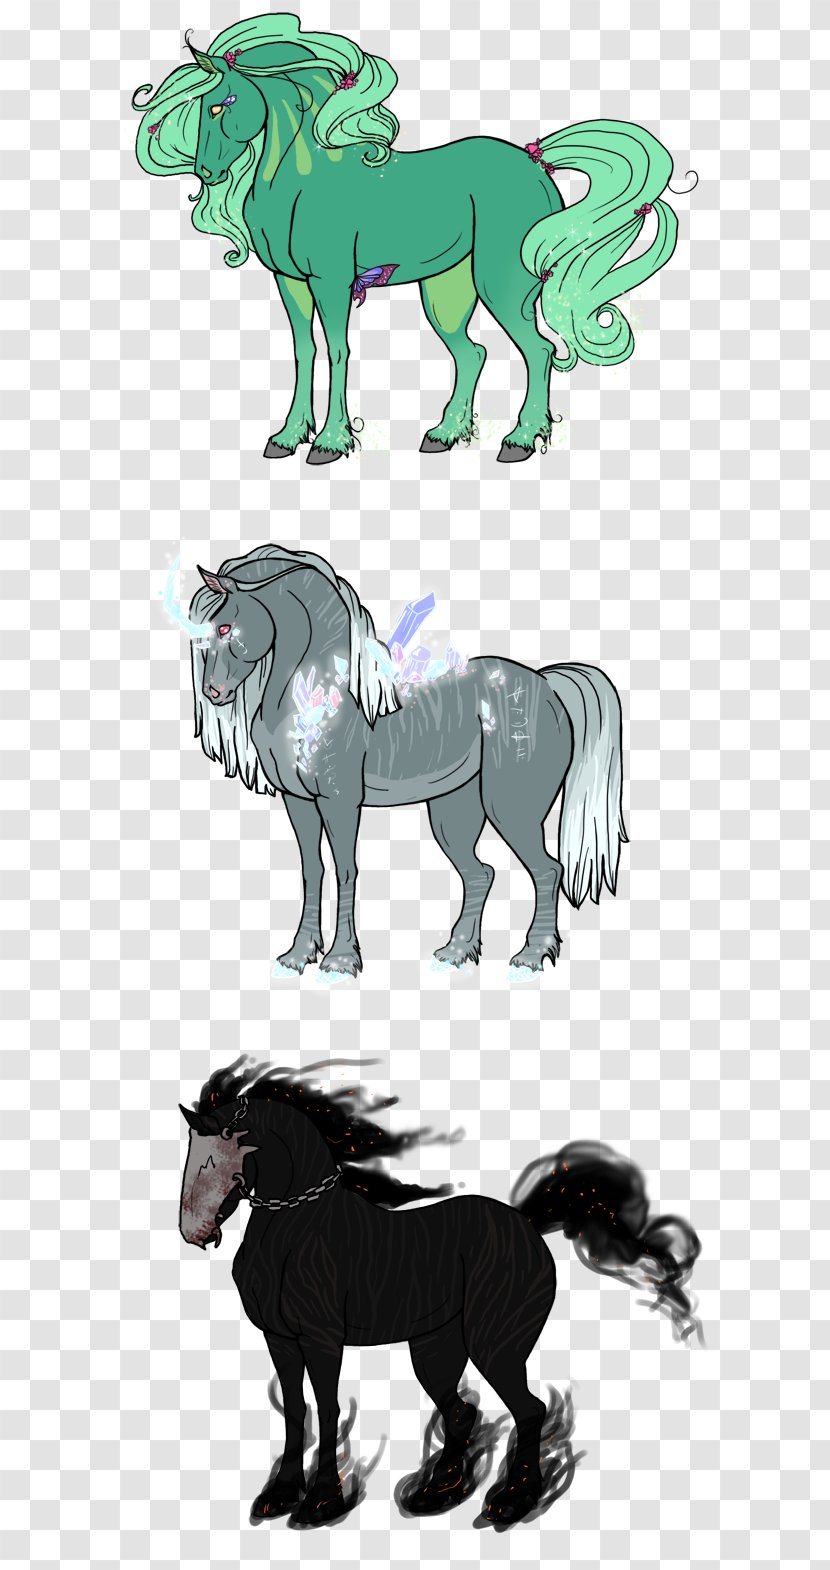 Lion Horse Cattle Pack Animal - Big Cats Transparent PNG